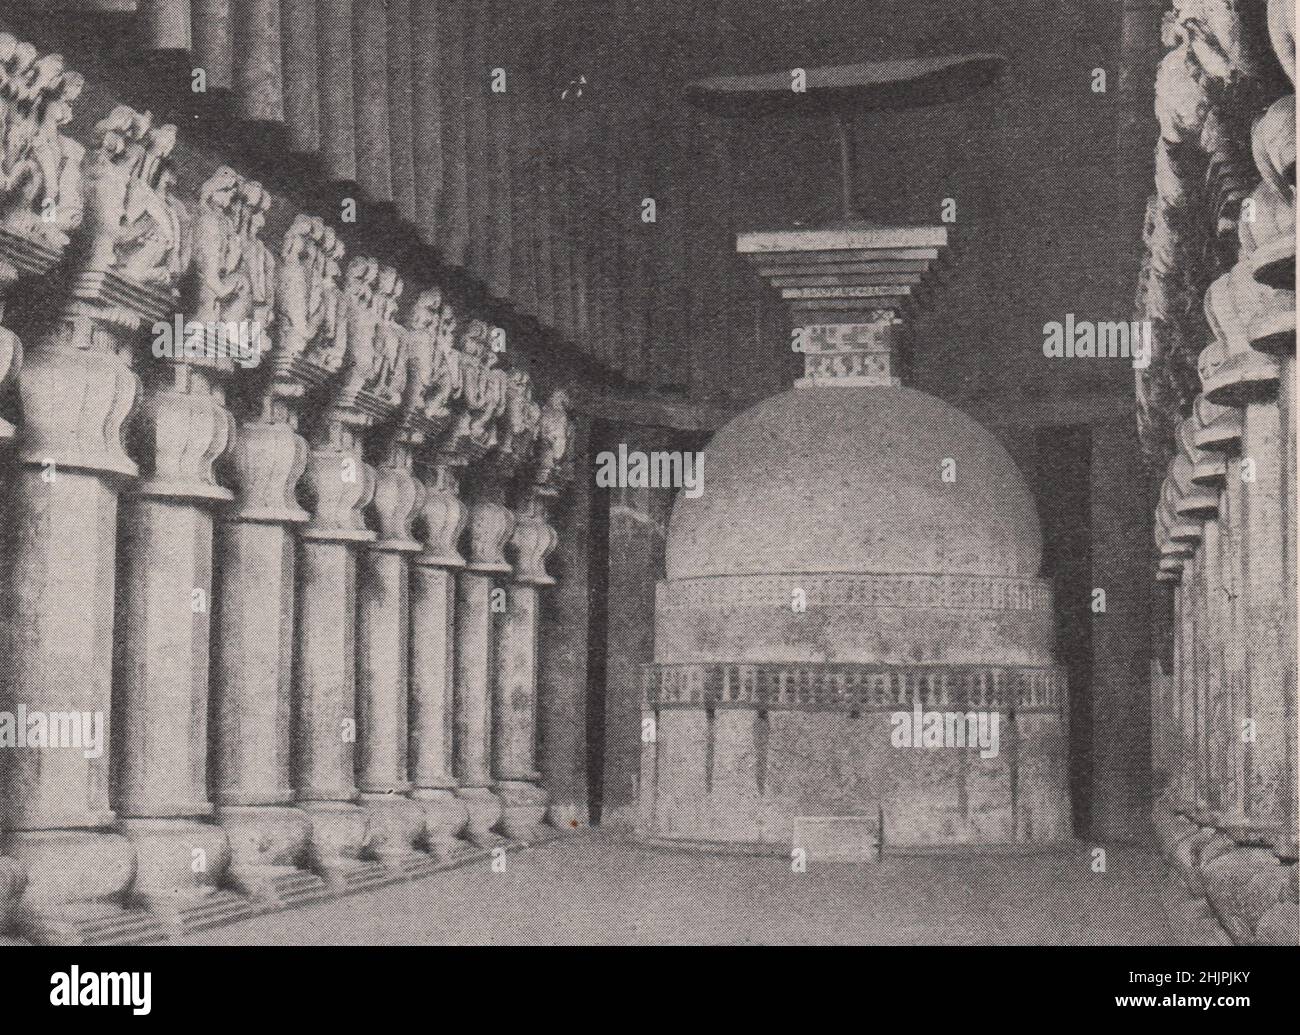 Within the sacred precincts of Buddha's cave temple at Karli. India. Bombay and Gujarat (1923) Stock Photo